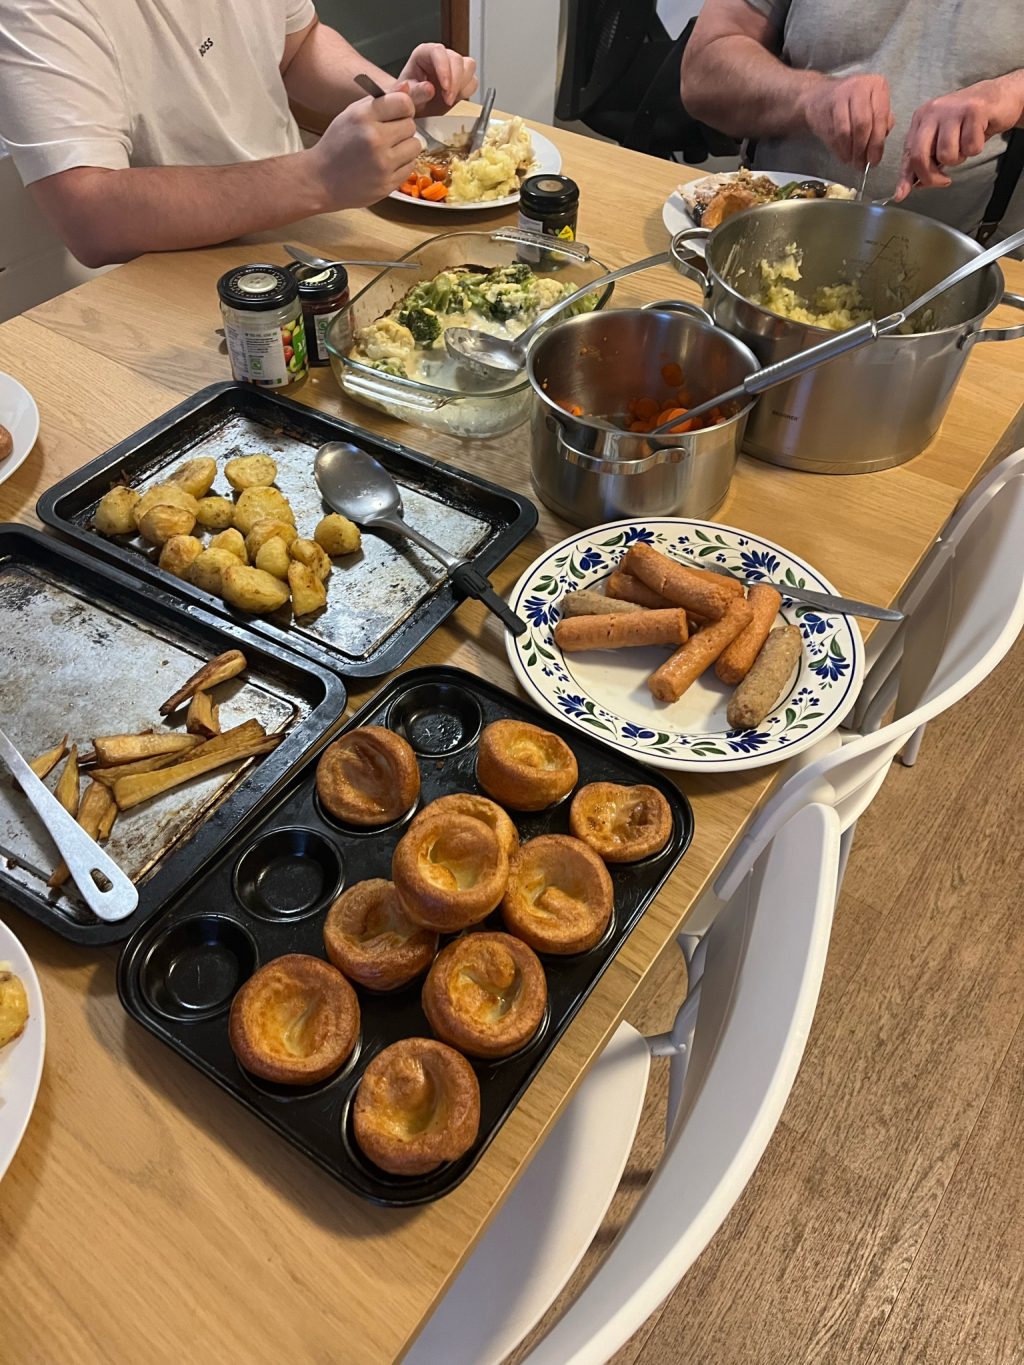 A roast dinner at the dinner table, including a tray of yorkshire puddings, some potatoes, and some plates of vegetables. You can see the plates and hands of people enjoying their food.